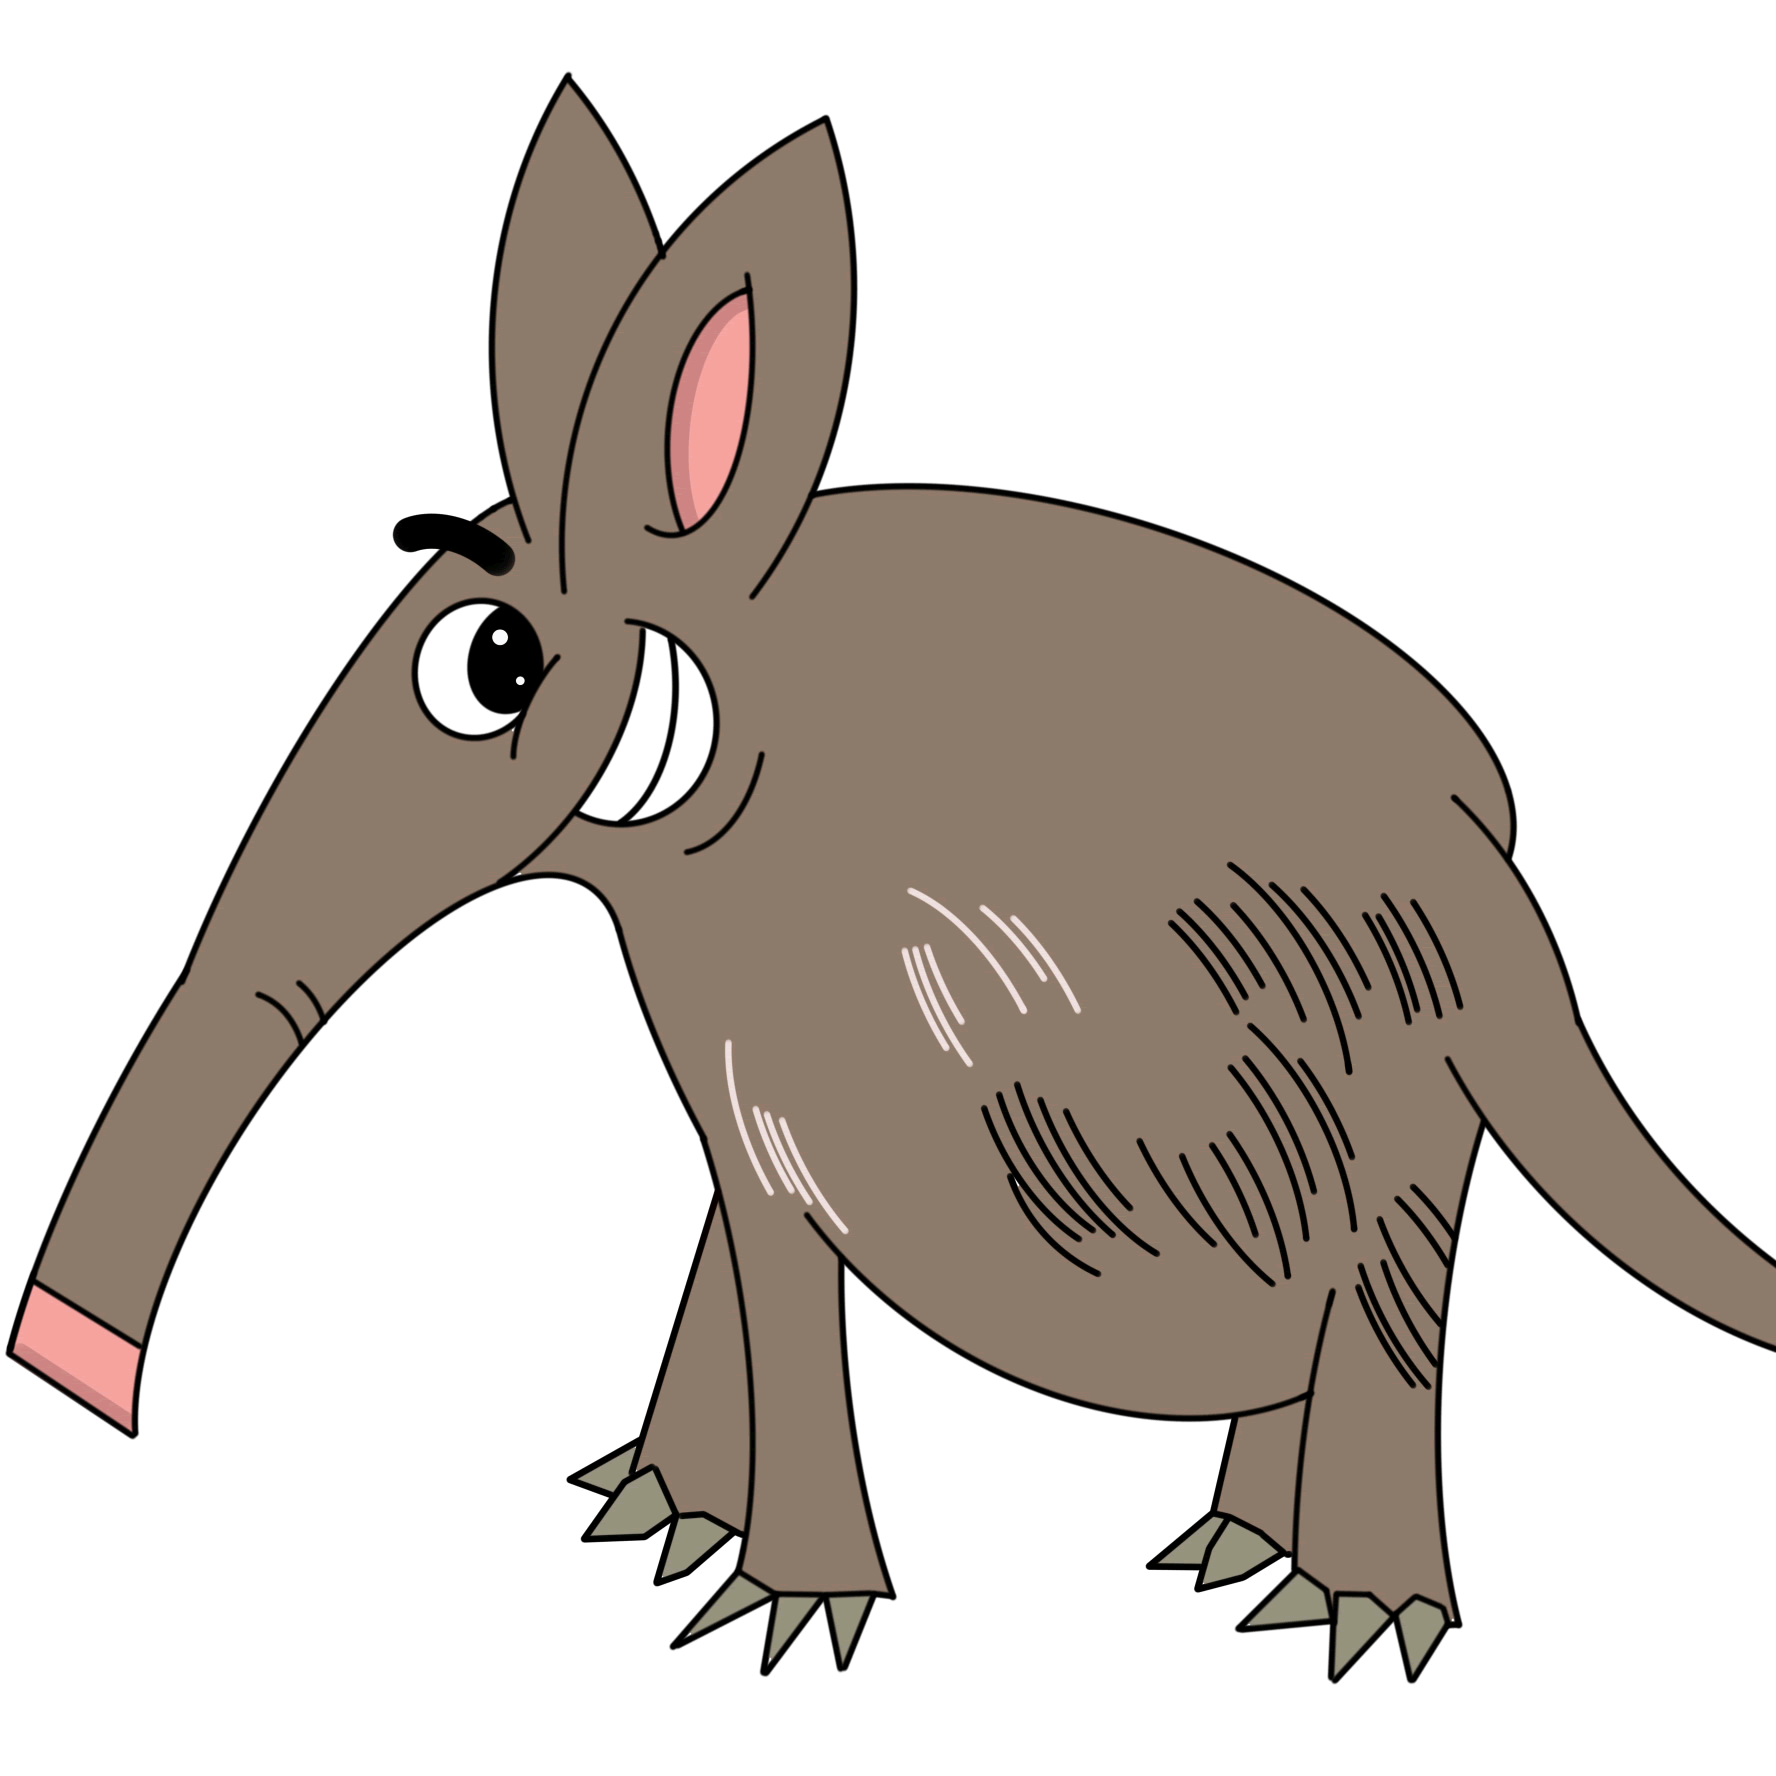 How to Draw an Aardvark Step by Step